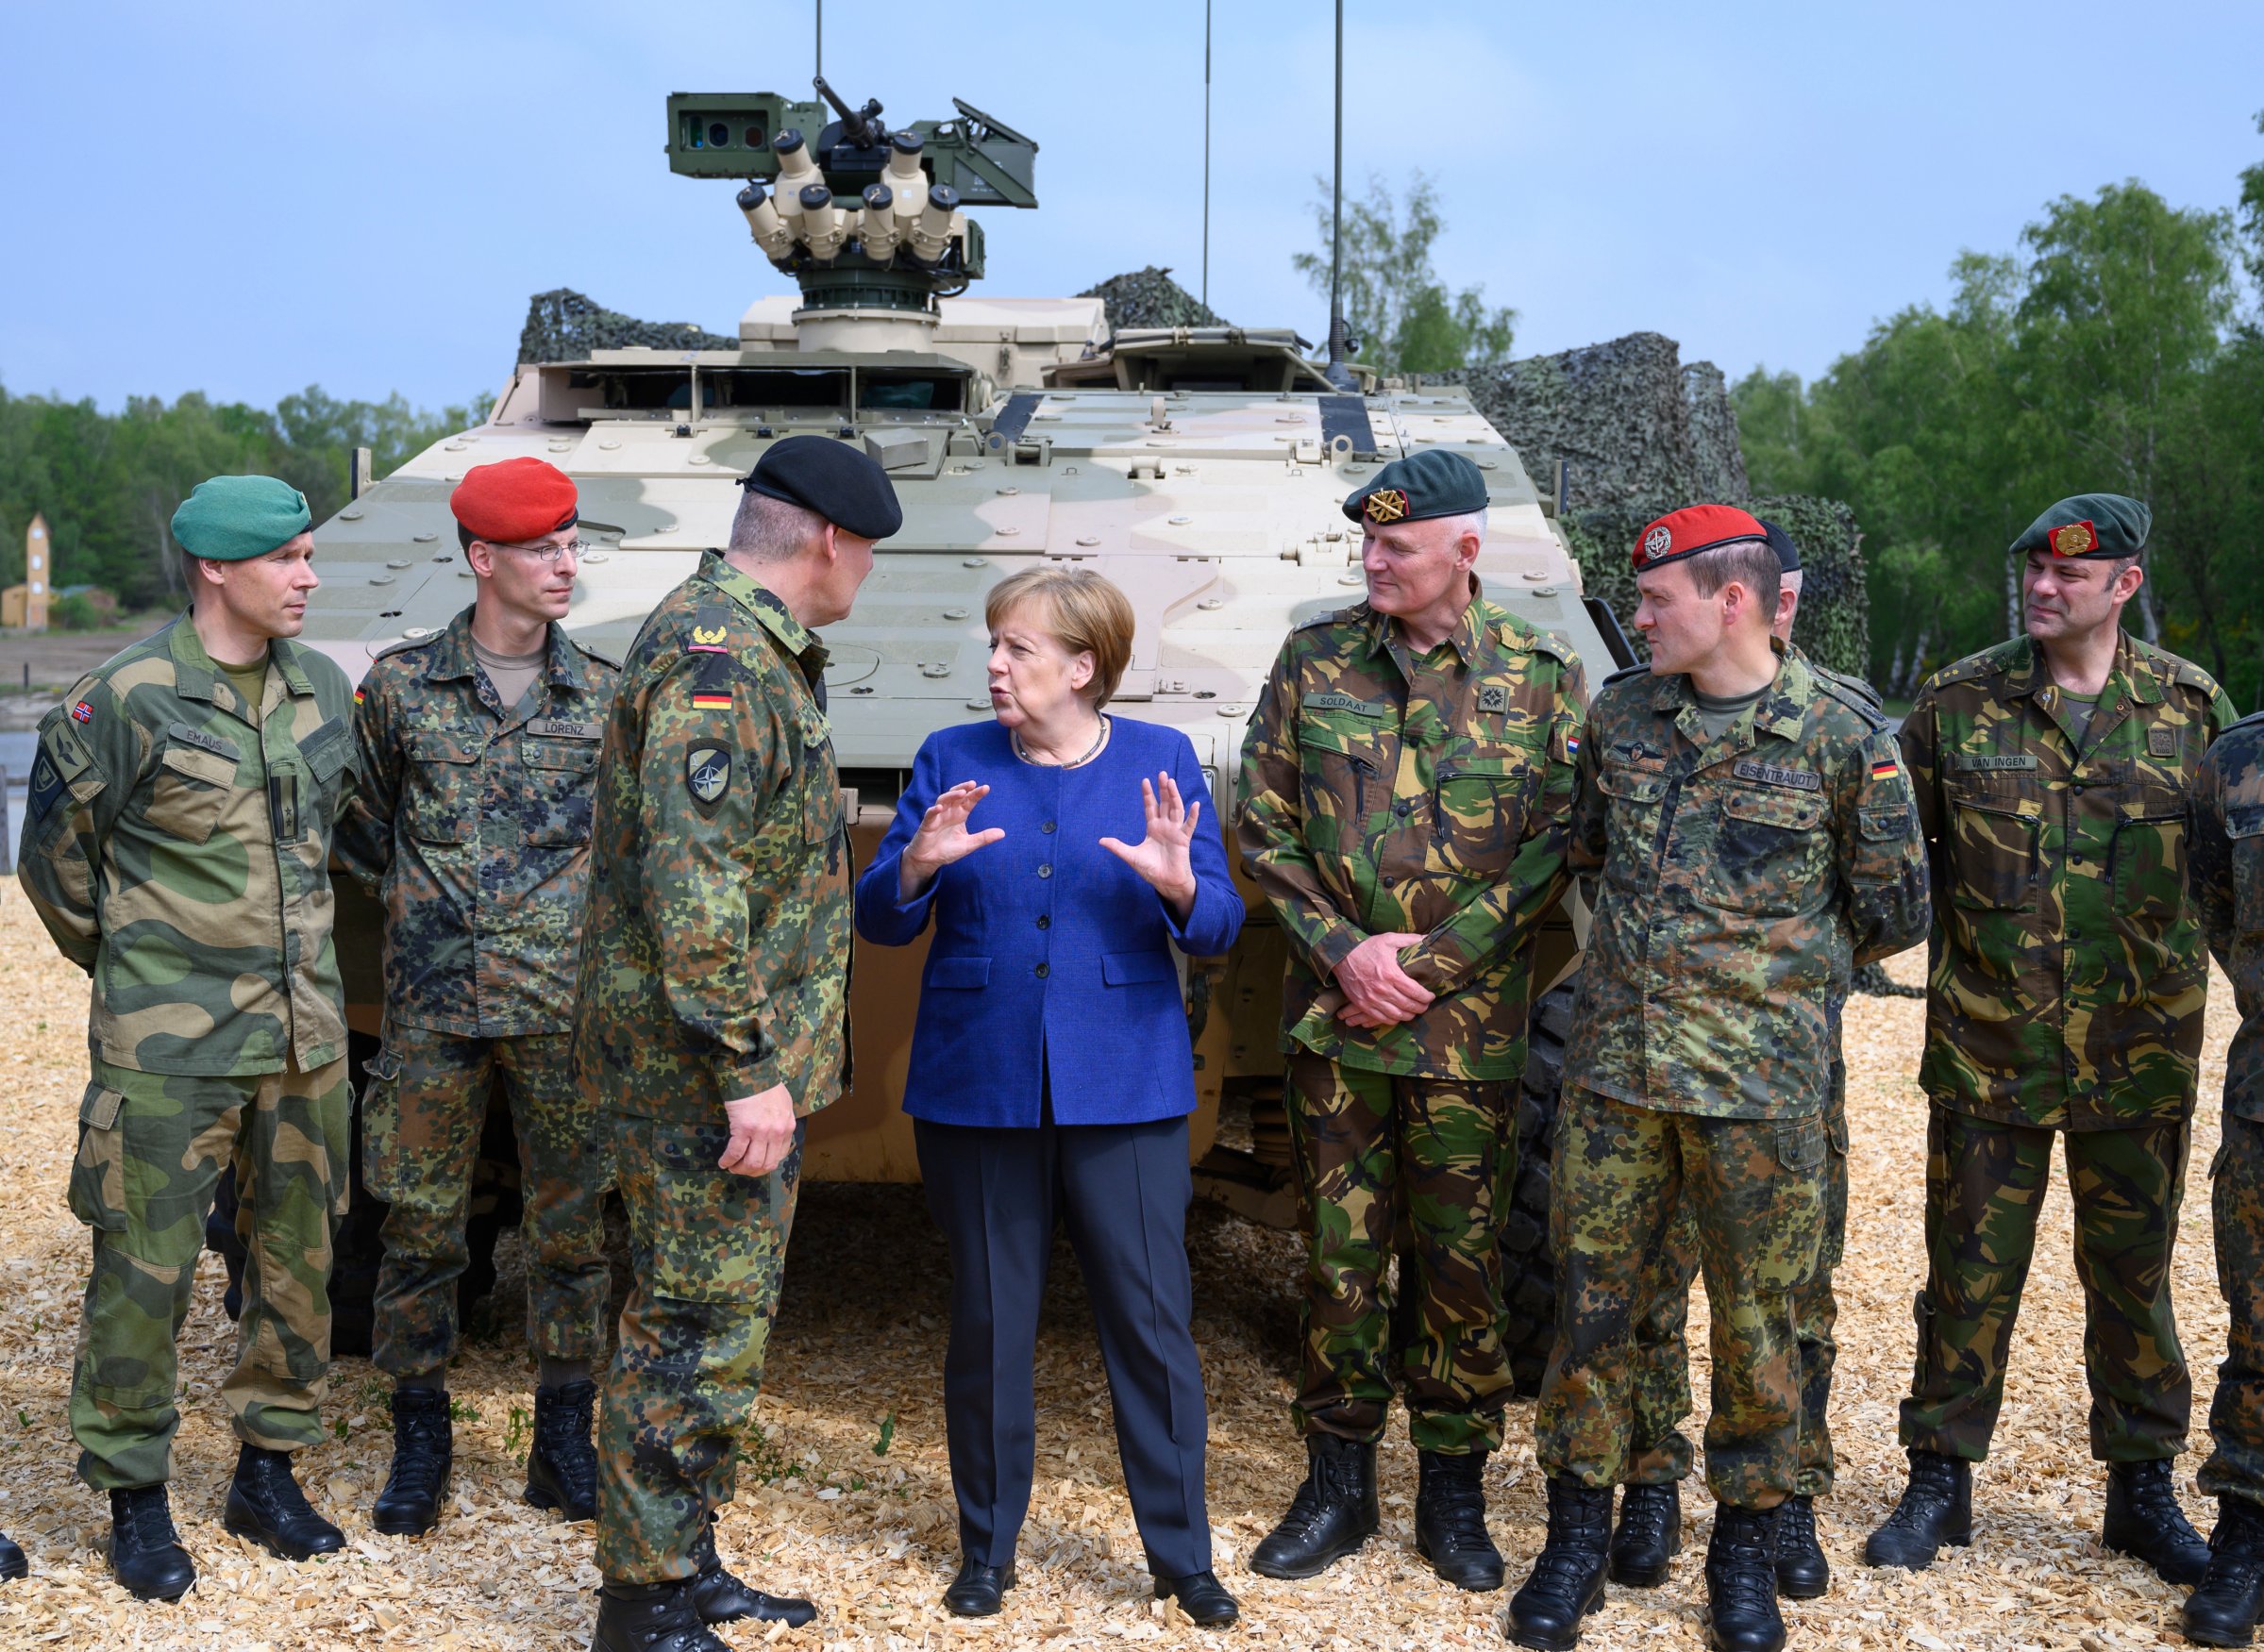 Germany’s military is investigating what information three Chinese reporters collected while Chancellor Angela Merkel visited a NATO base.